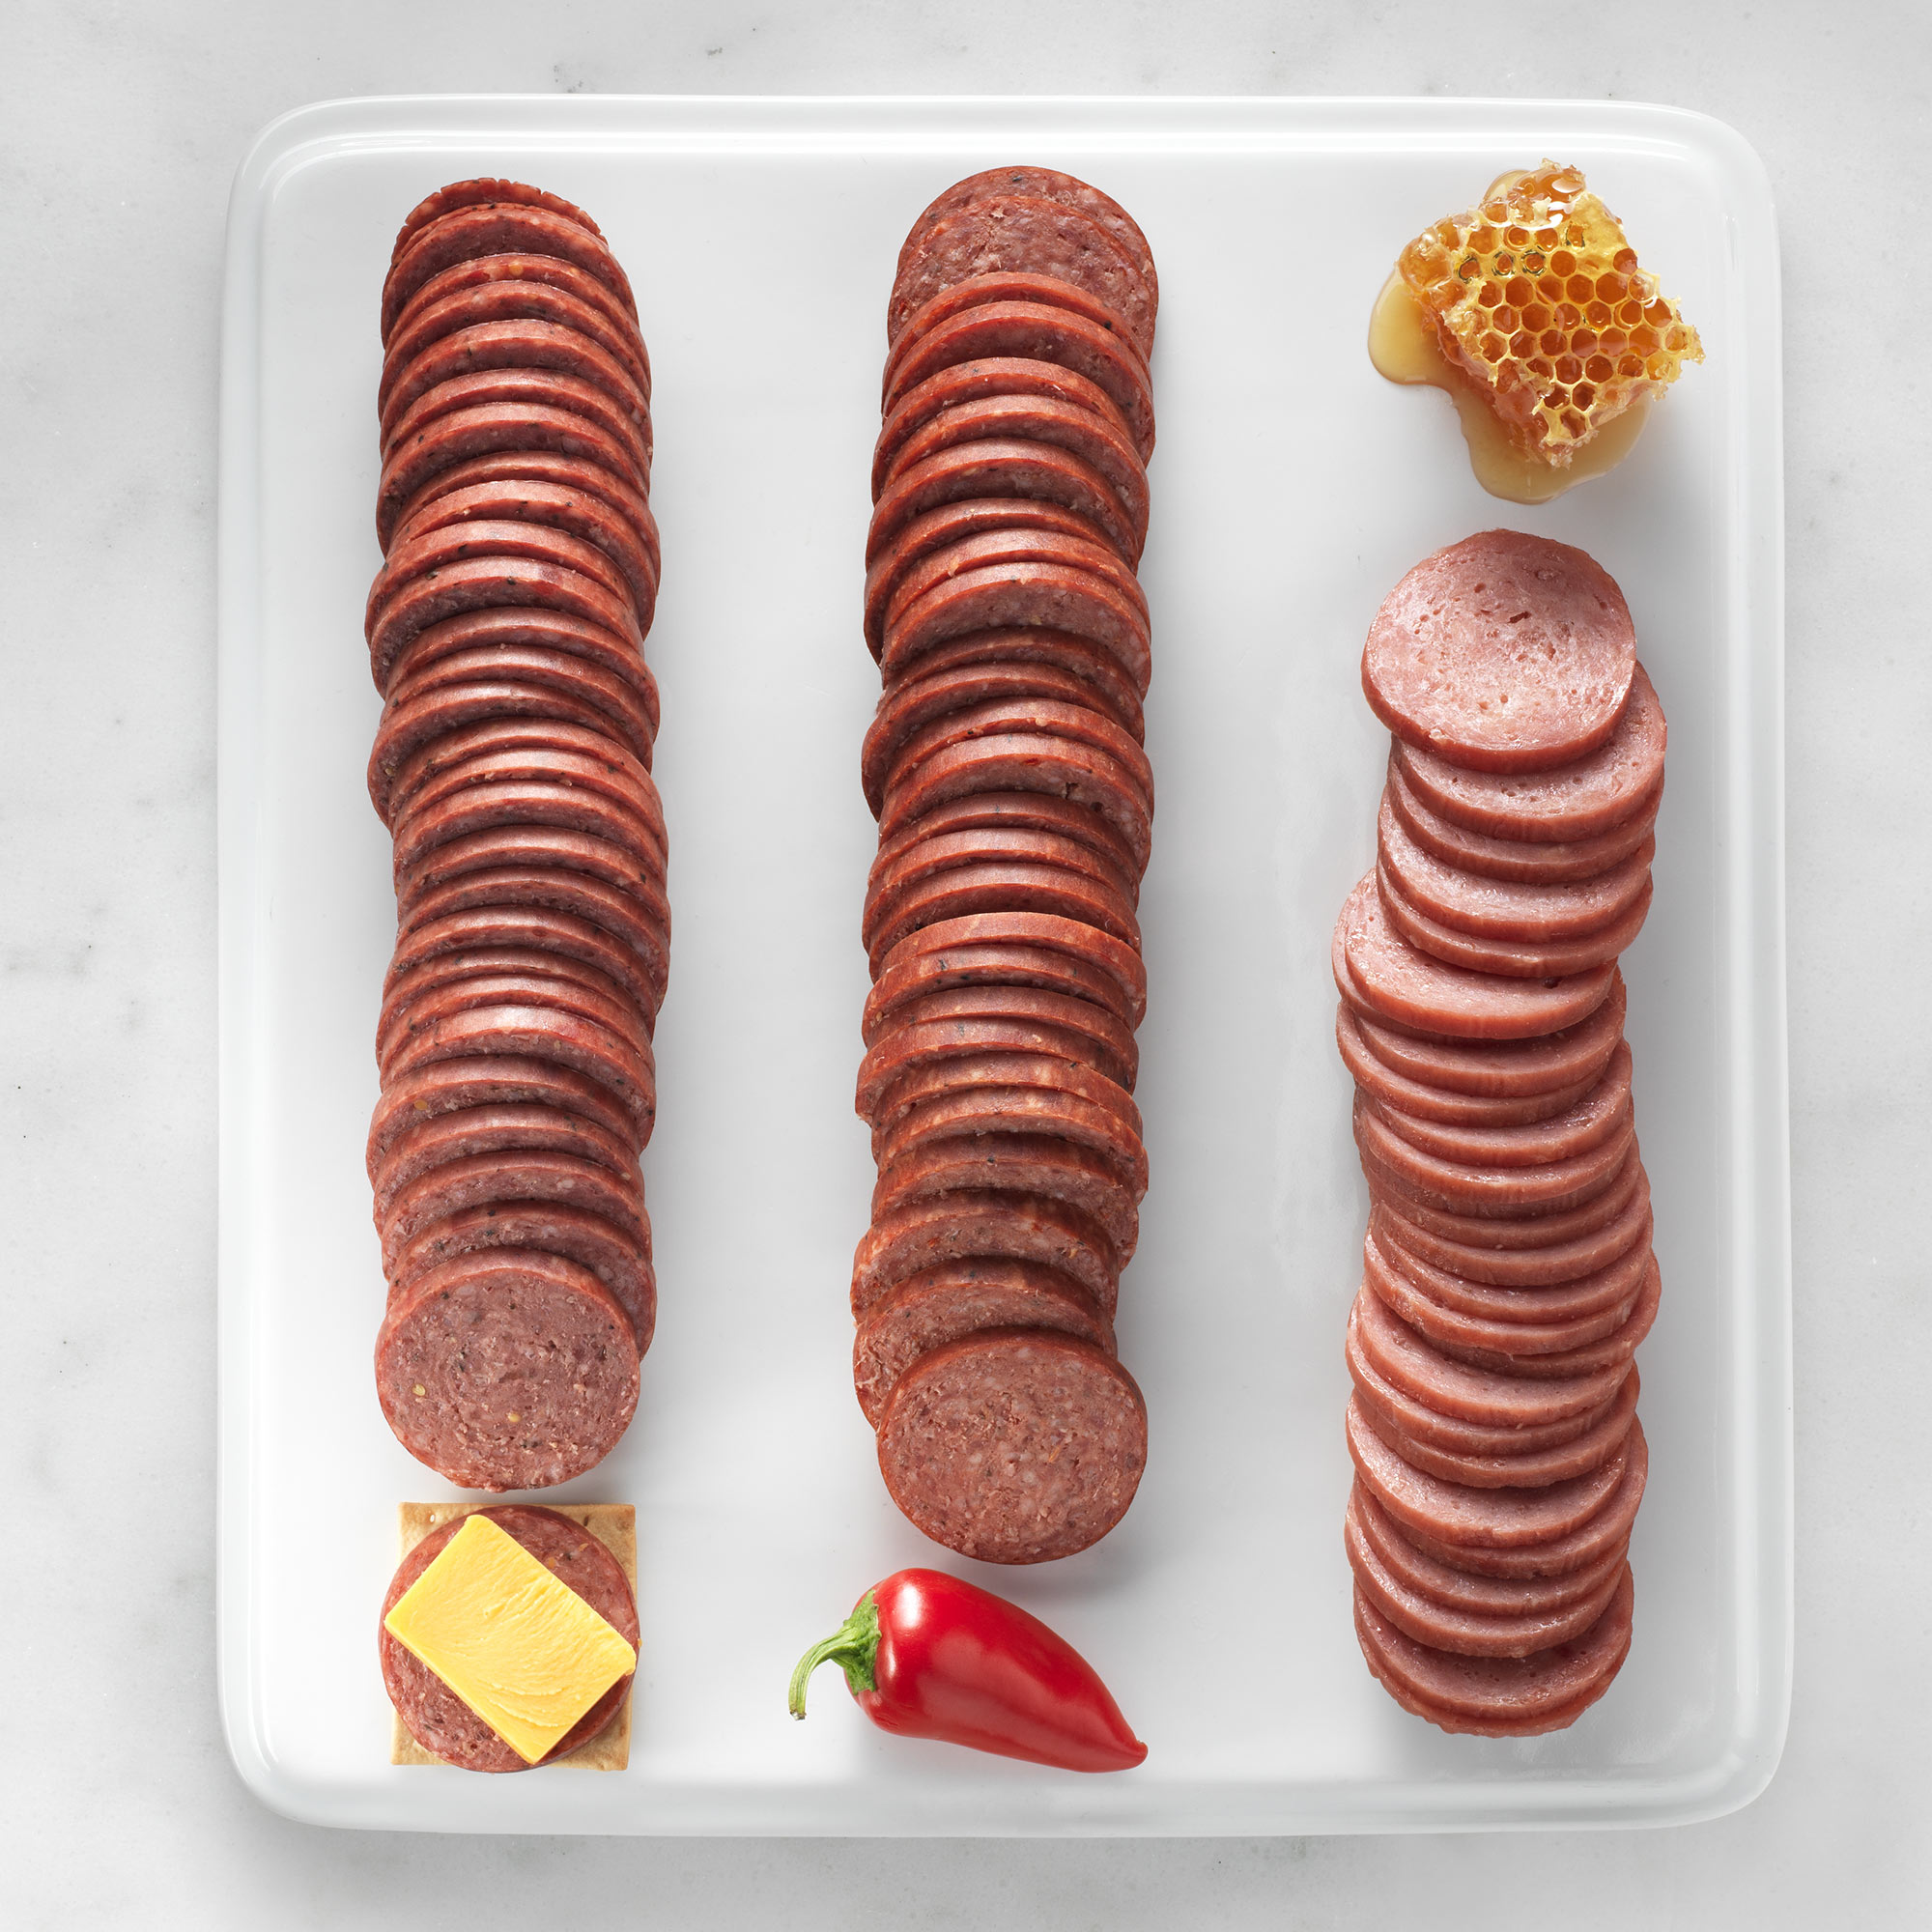 Hickory Farms Set of Three (10 oz) Smoked Signature Beef Summer Sausages 